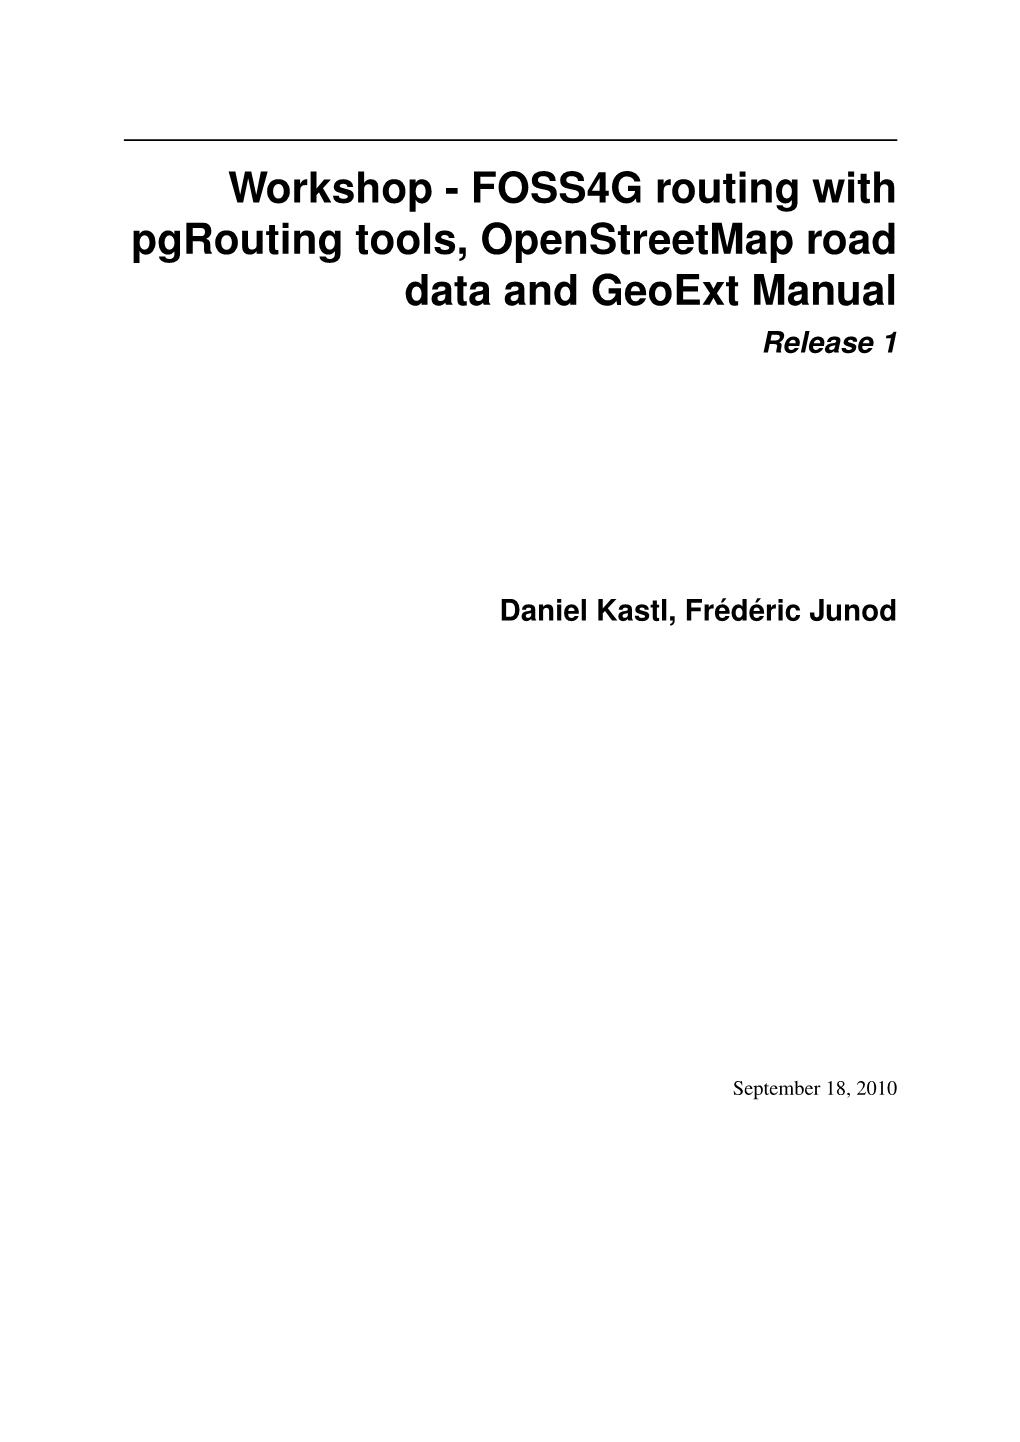 FOSS4G Routing with Pgrouting Tools, Openstreetmap Road Data and Geoext Manual Release 1